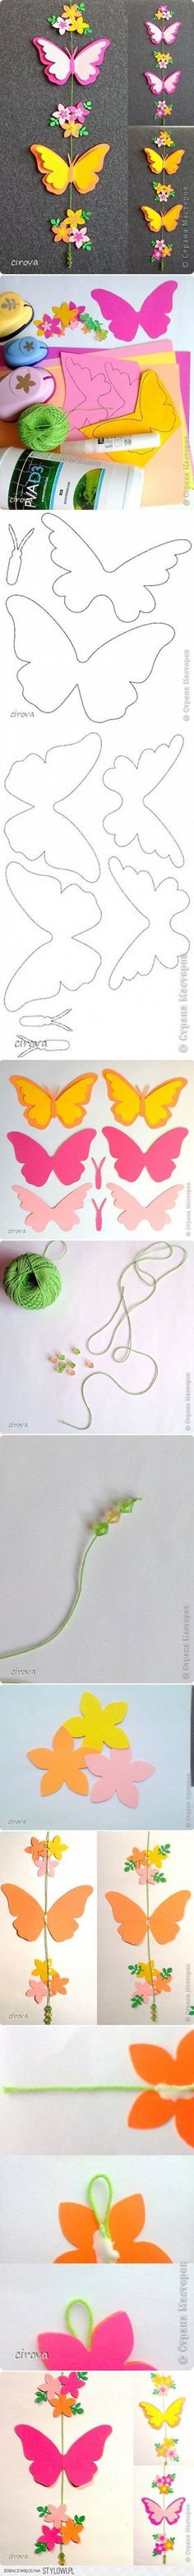 paper butterfly mobile instructions